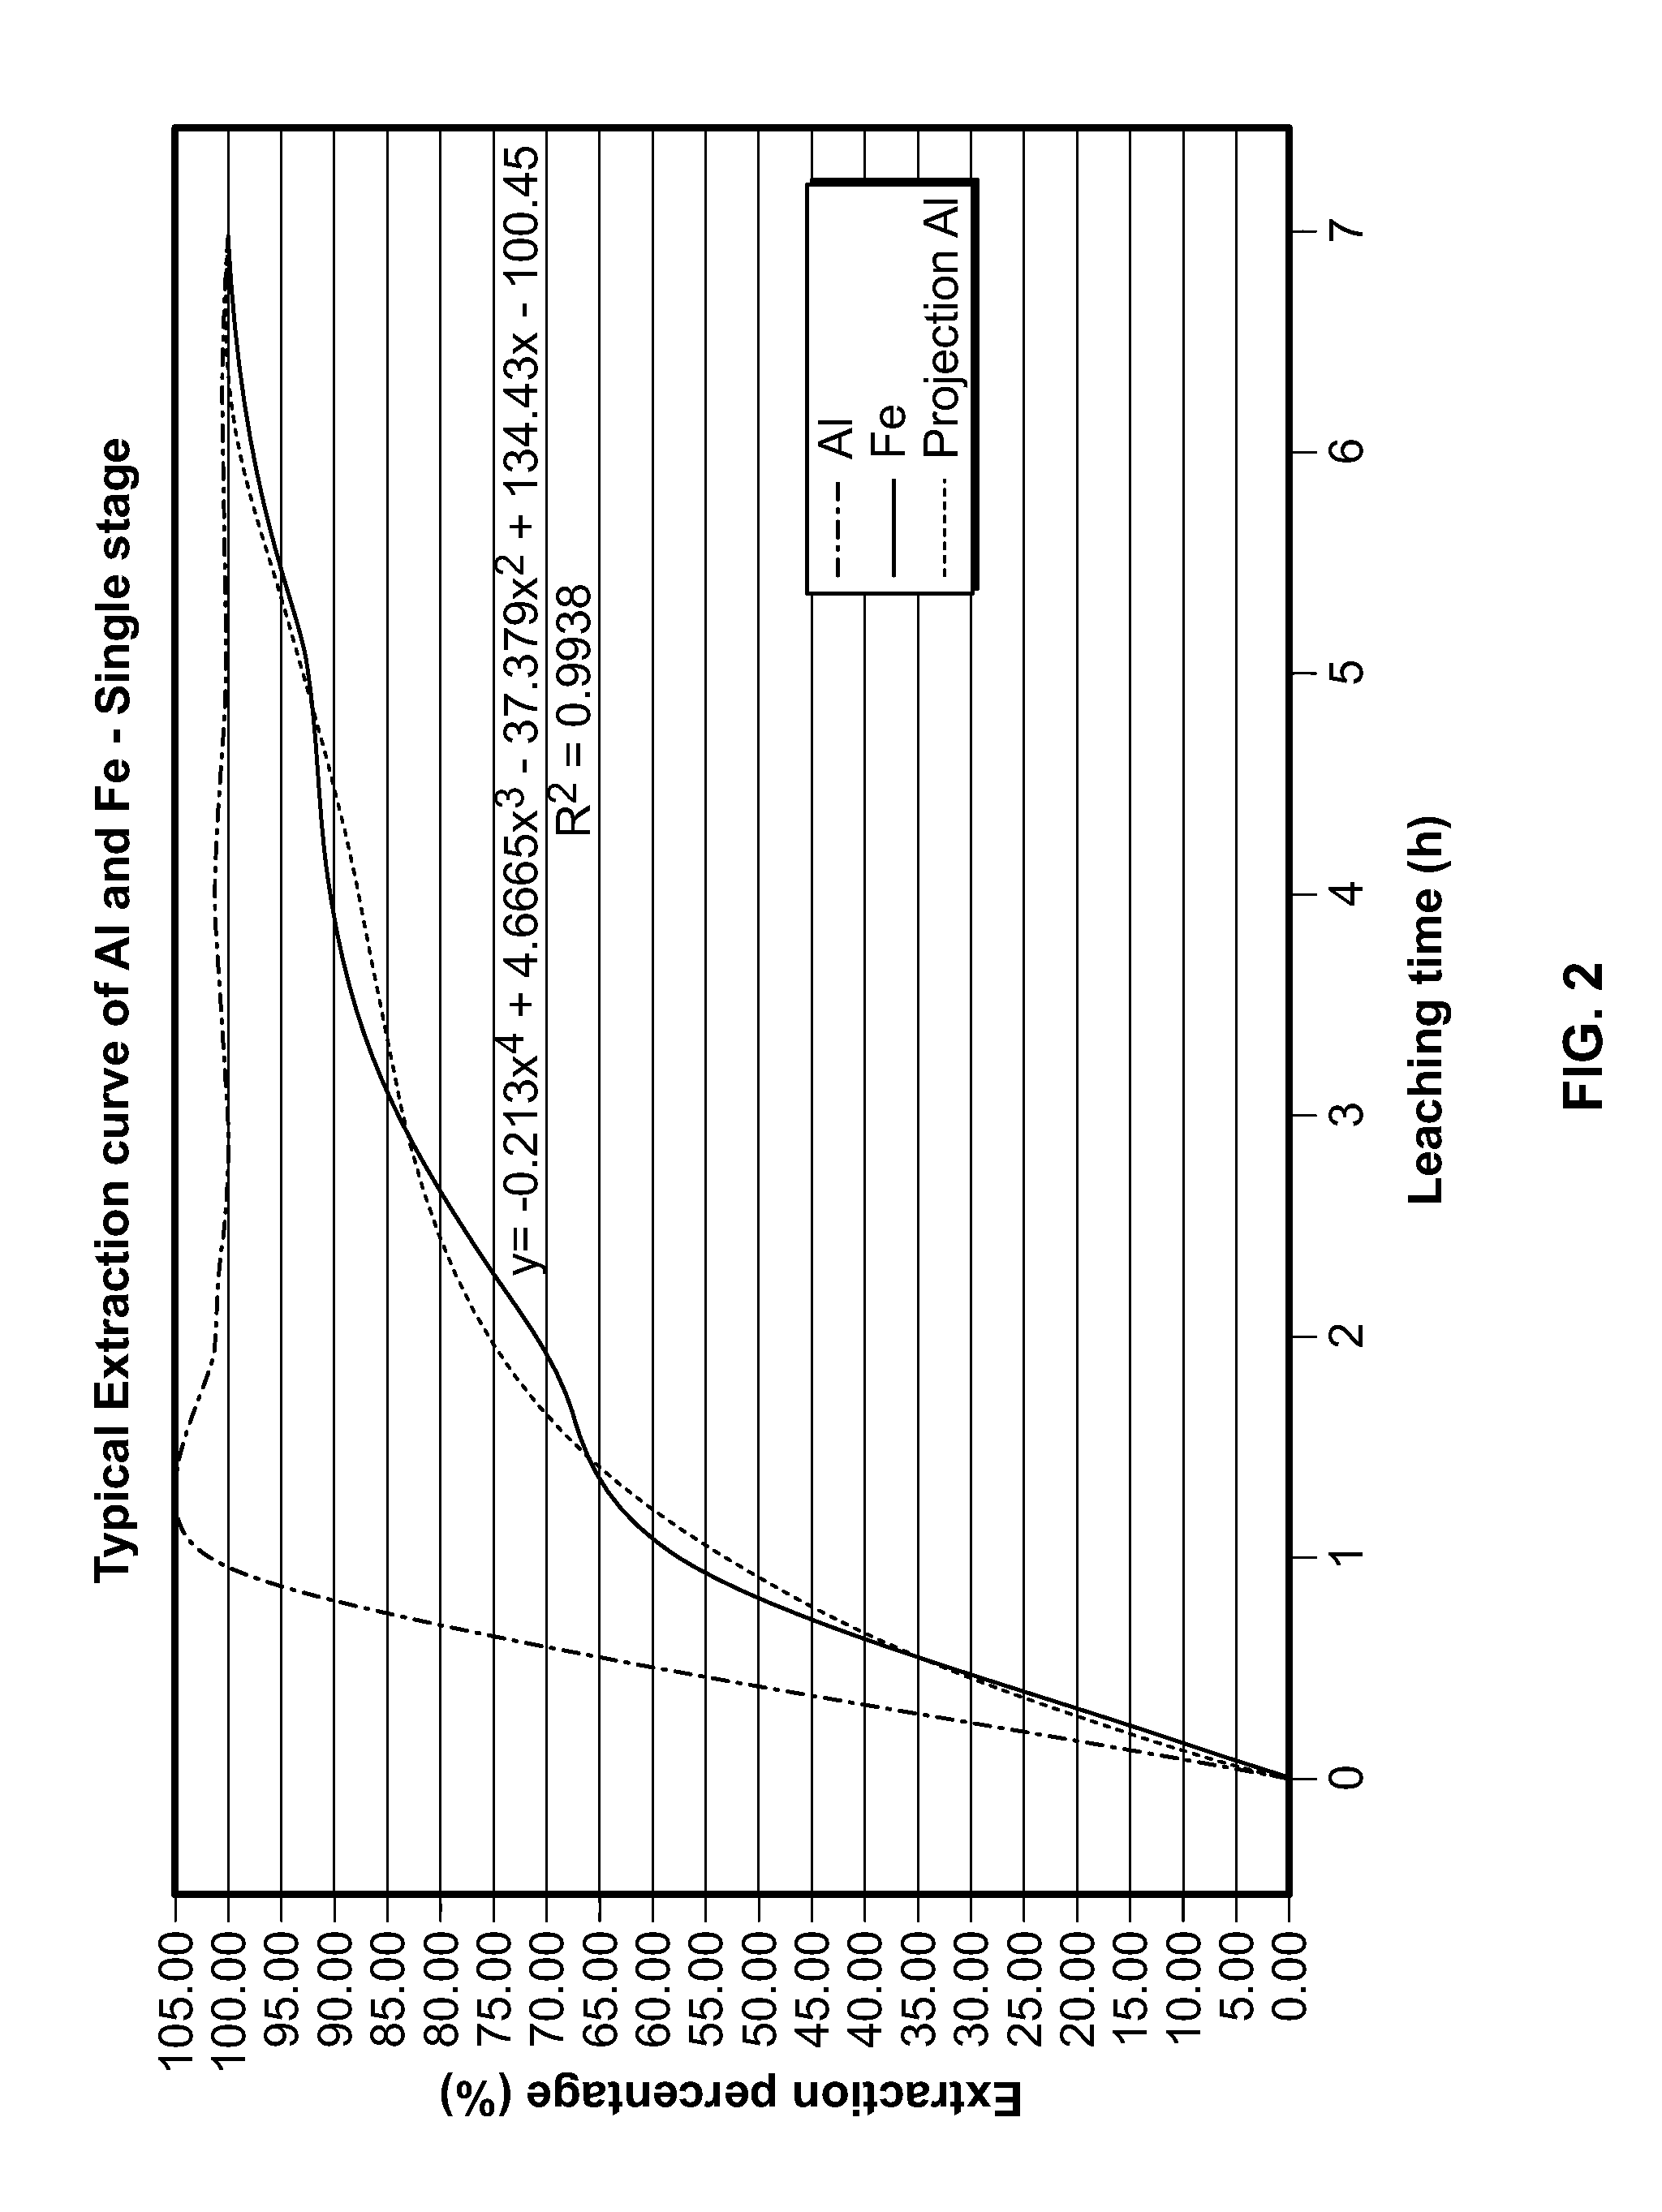 Processes for preparing alumina and various other products